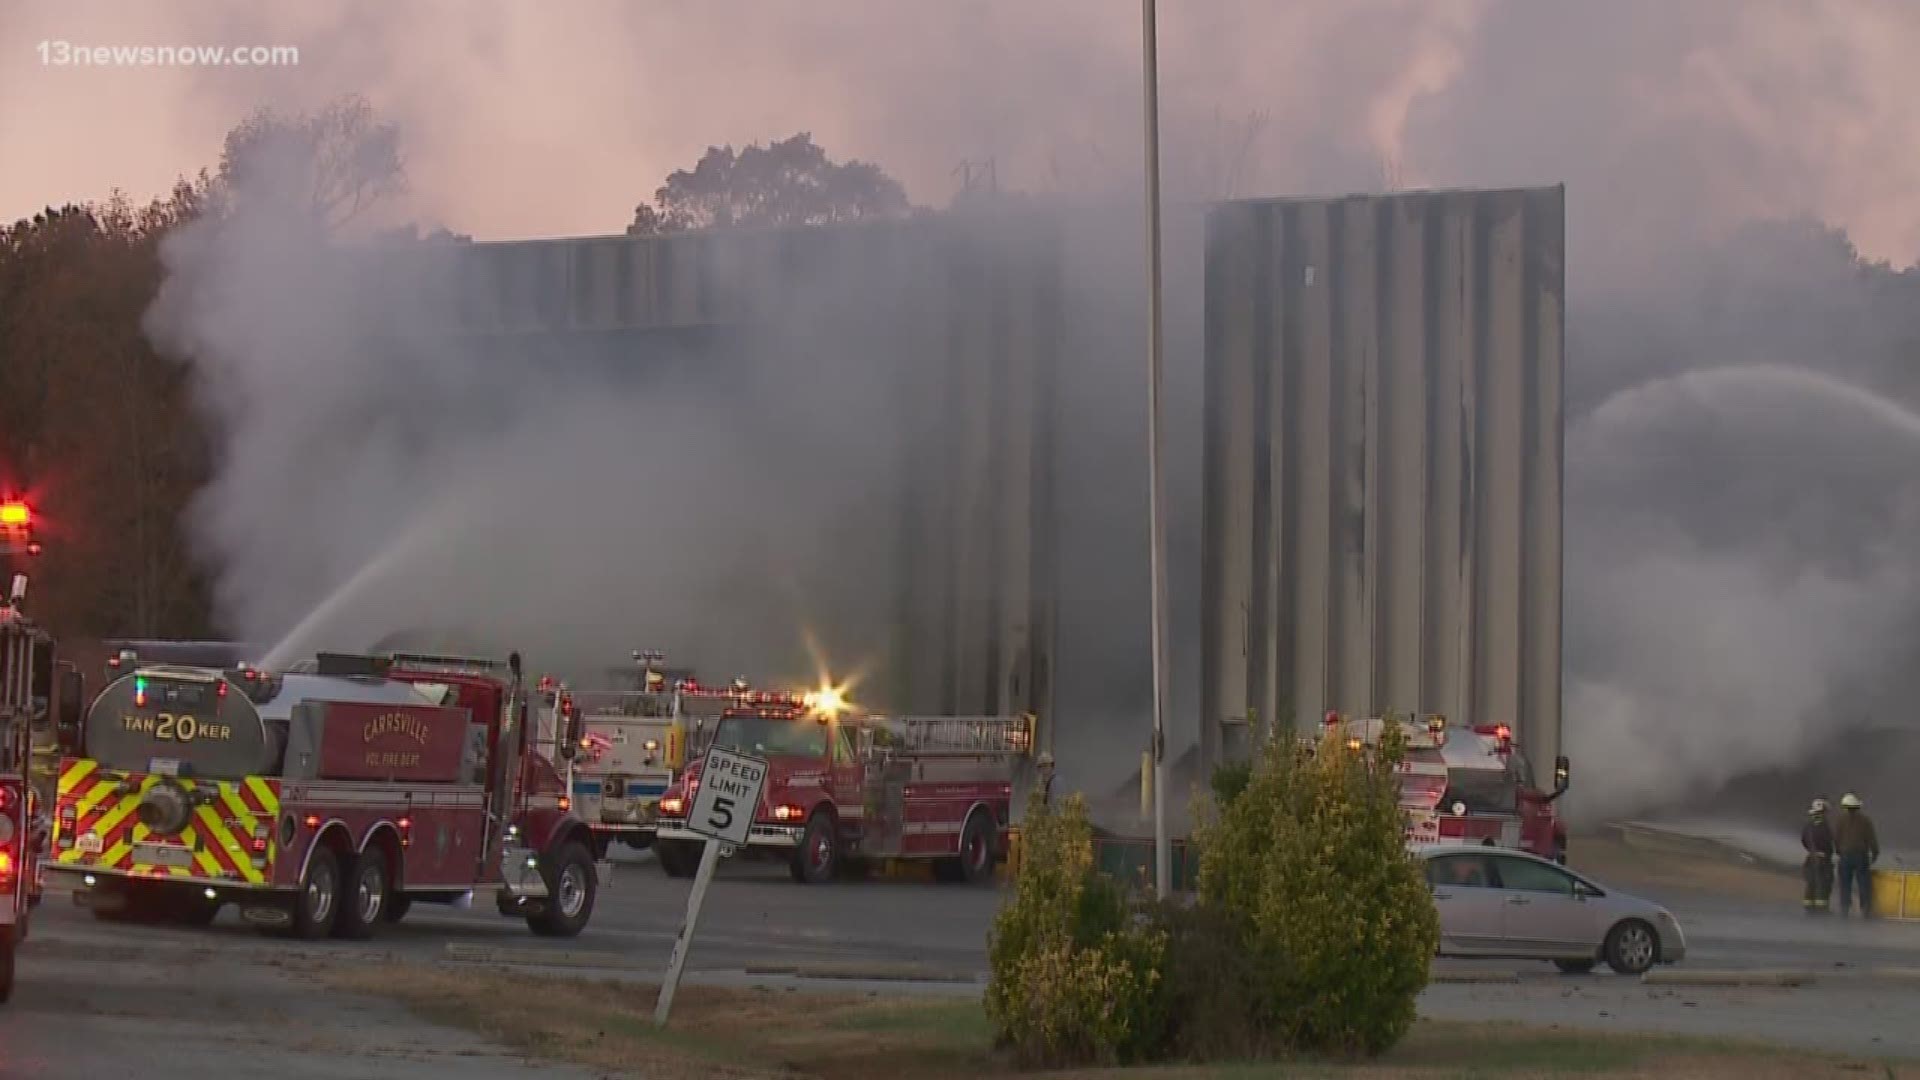 There's no word on what caused a fire to break out at the Valley Protein Plant in Emporia. The building is a total loss.